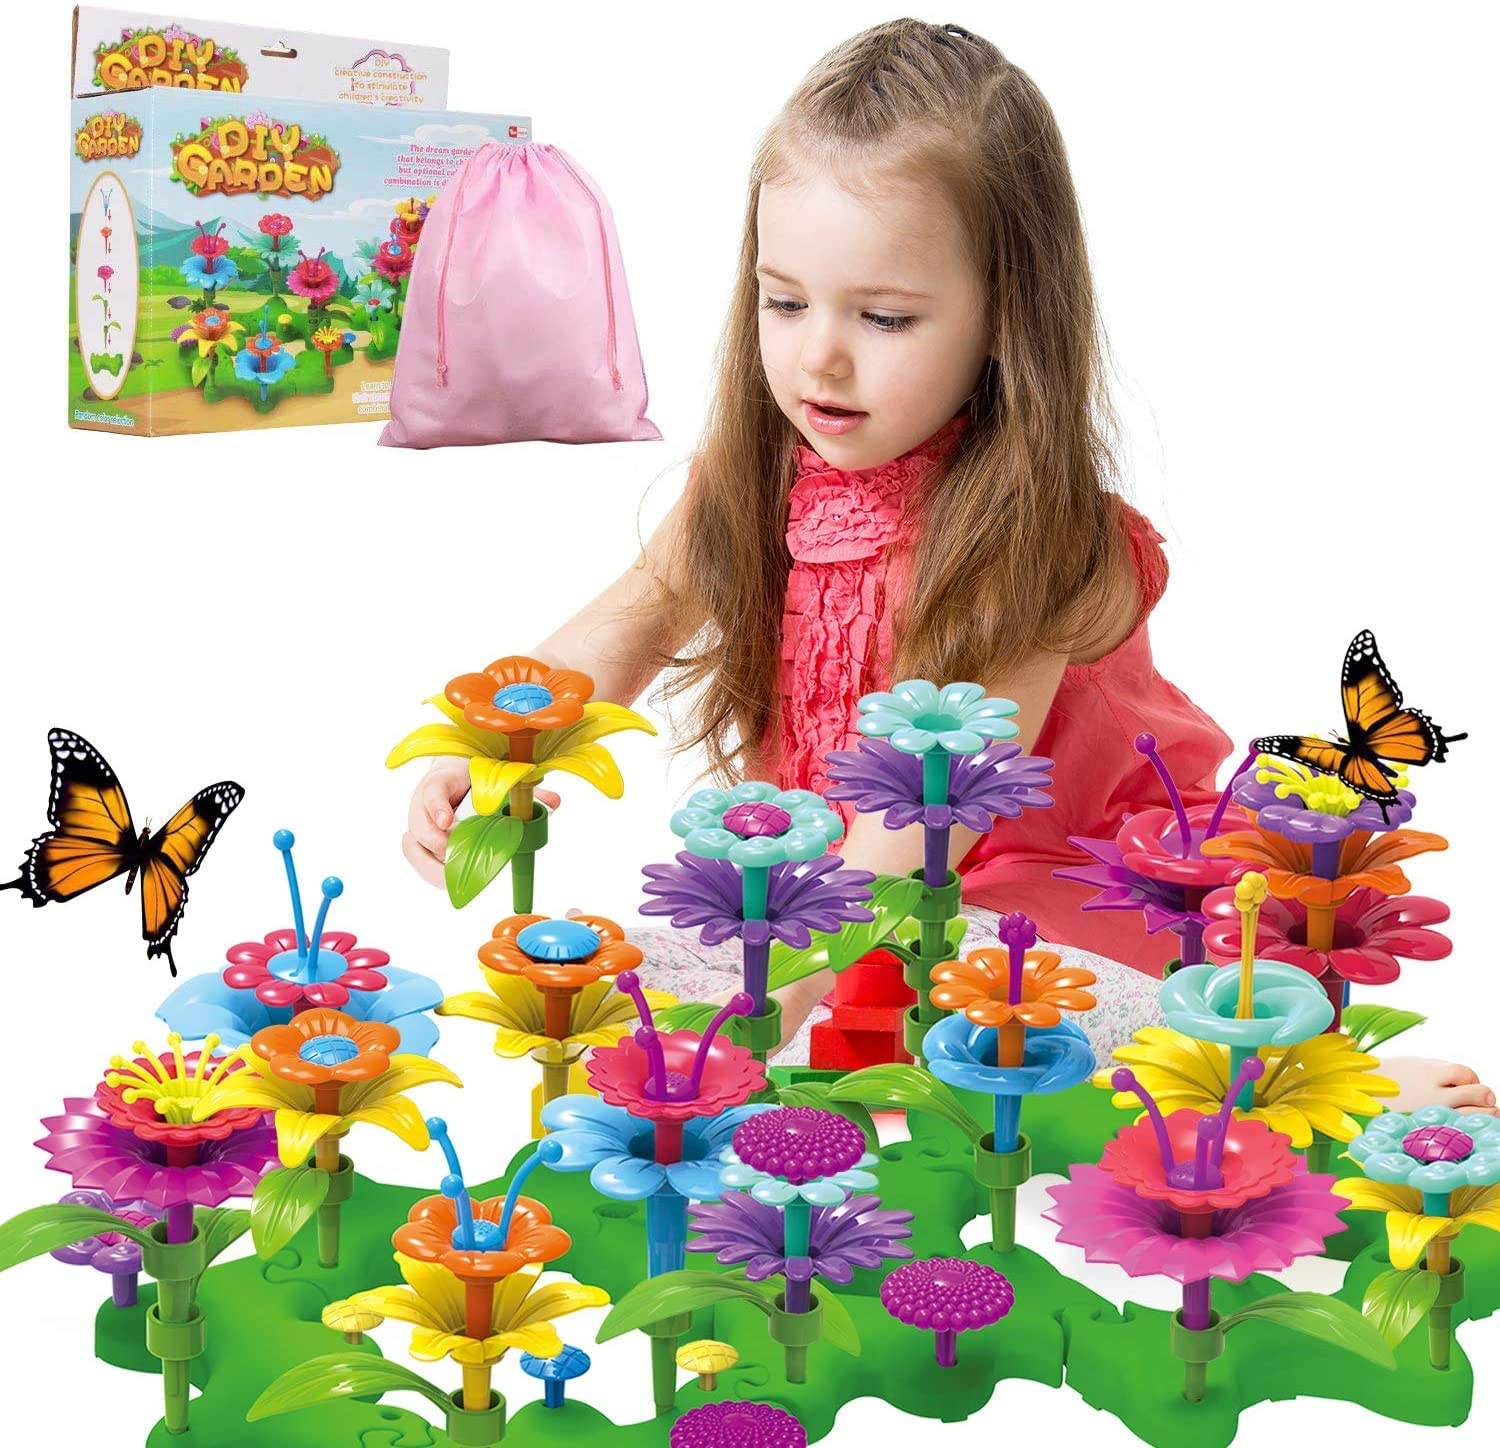 150pcs Flower Garden Building Toys for Preschool Educational Activity STEM Toddler Toys for Age 3 4 5 6 Year Old Girls Floral Gardening Pretend kit Birthday Gifts and Stacking Learning Playset 